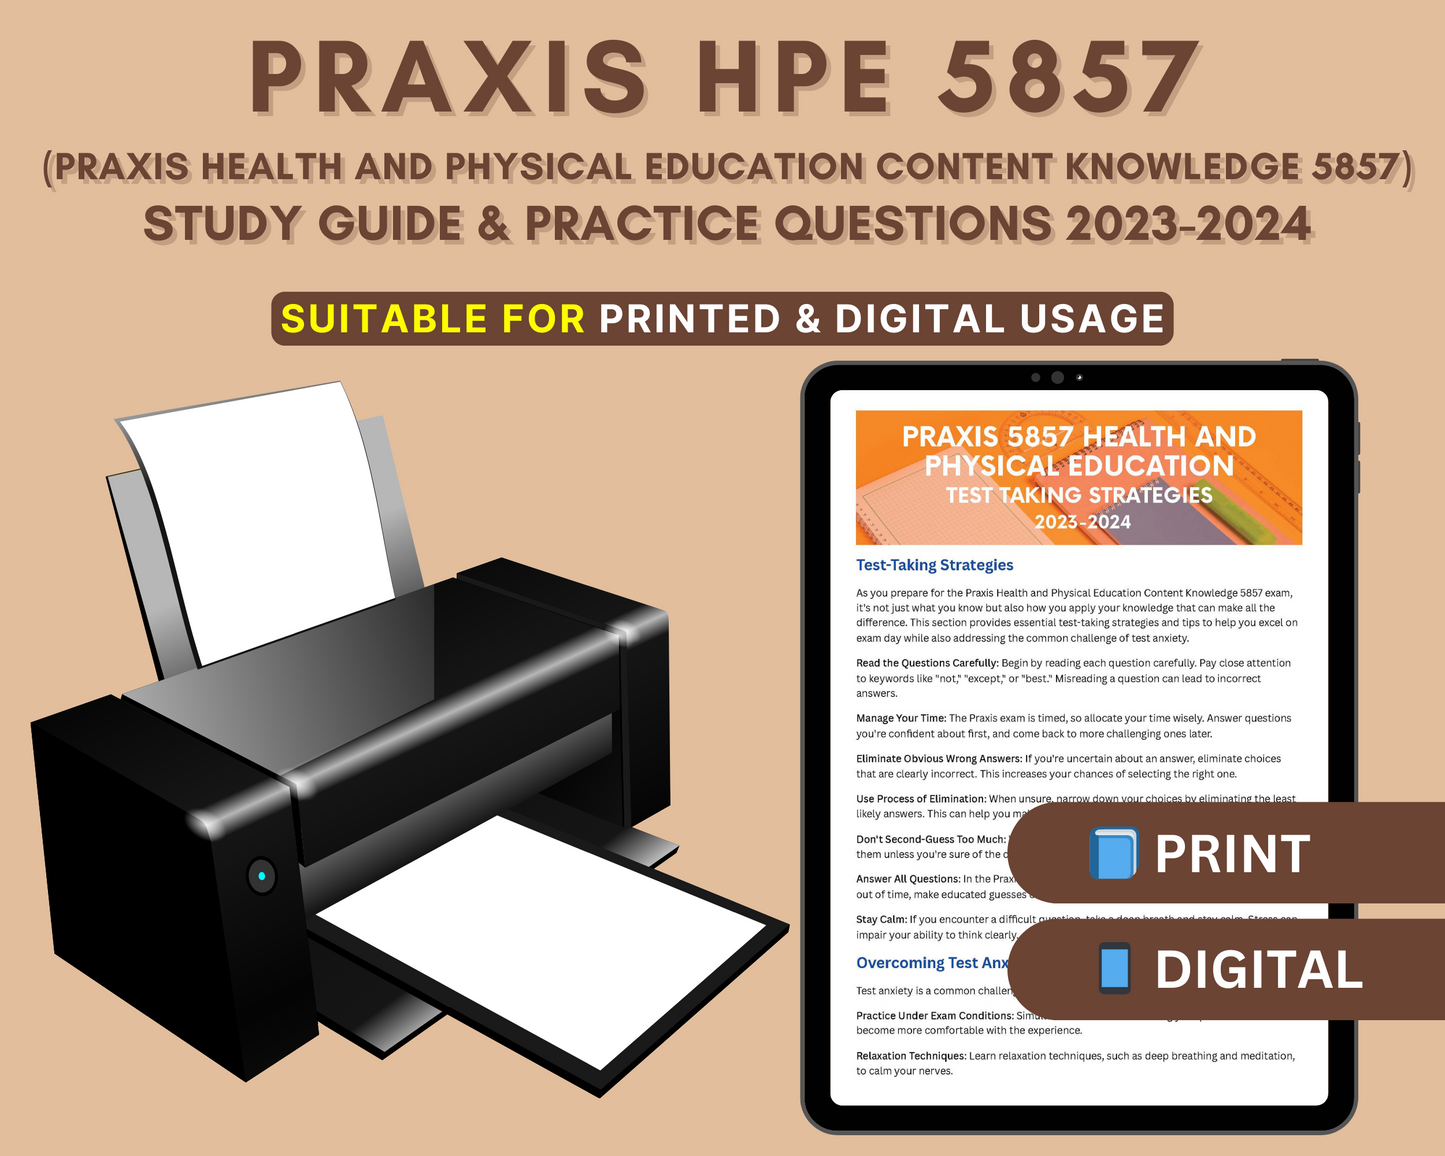 Praxis HPE Content Knowledge 5857 Study Guide 2023-2024: In-Depth Review & Practice Tests for Certified Teacher Exam